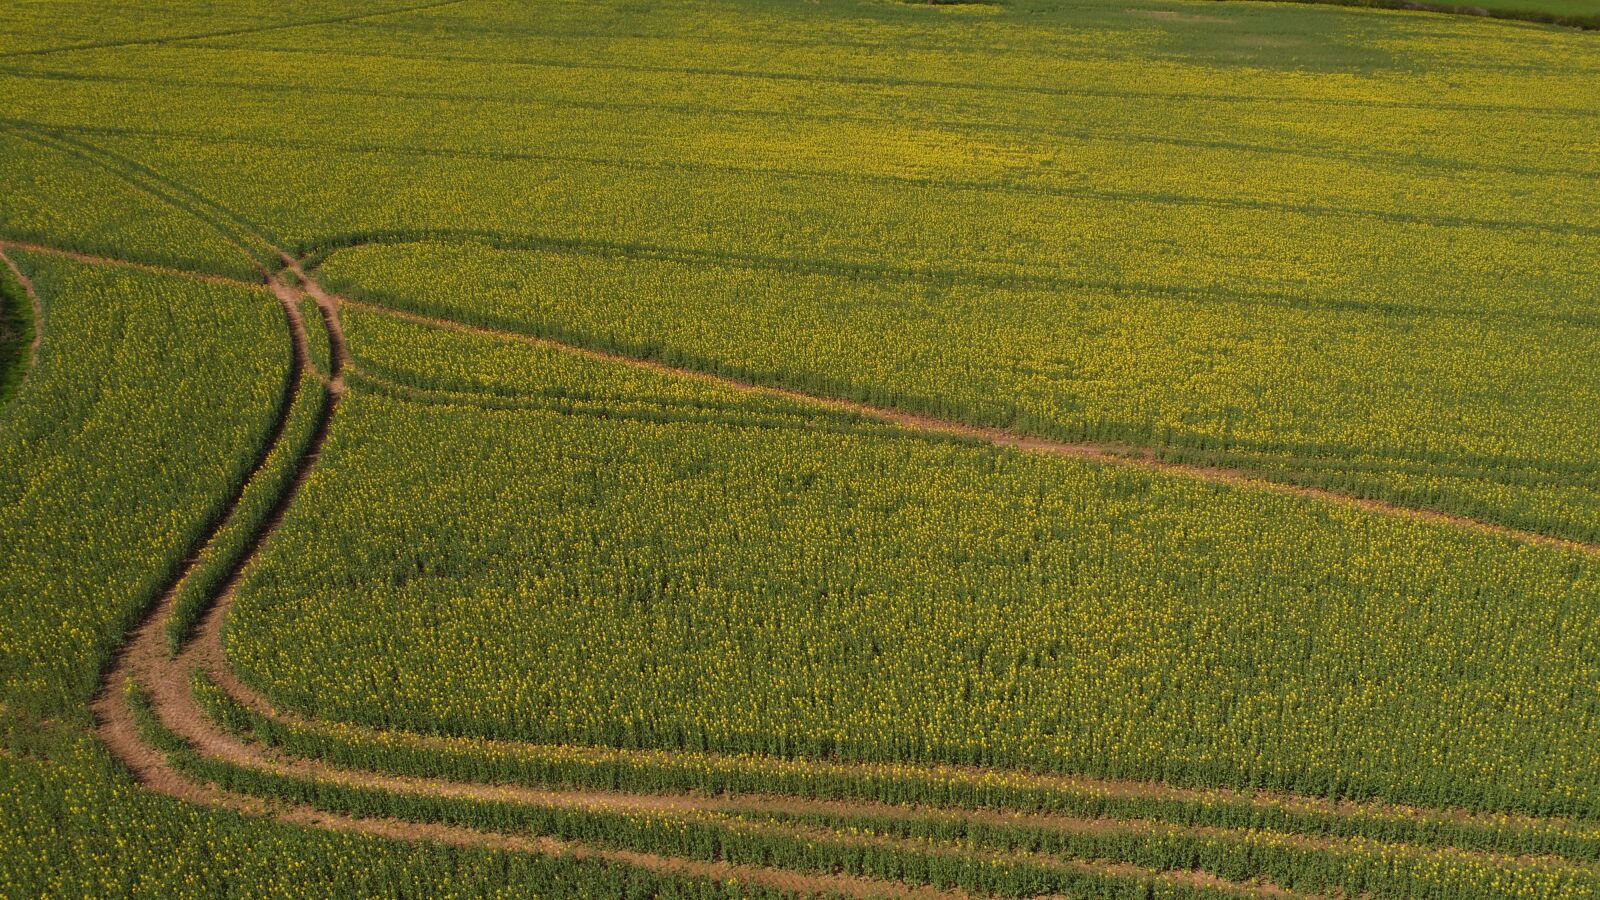 DJI FC550 sample photo. Agriculture, field, nature photography